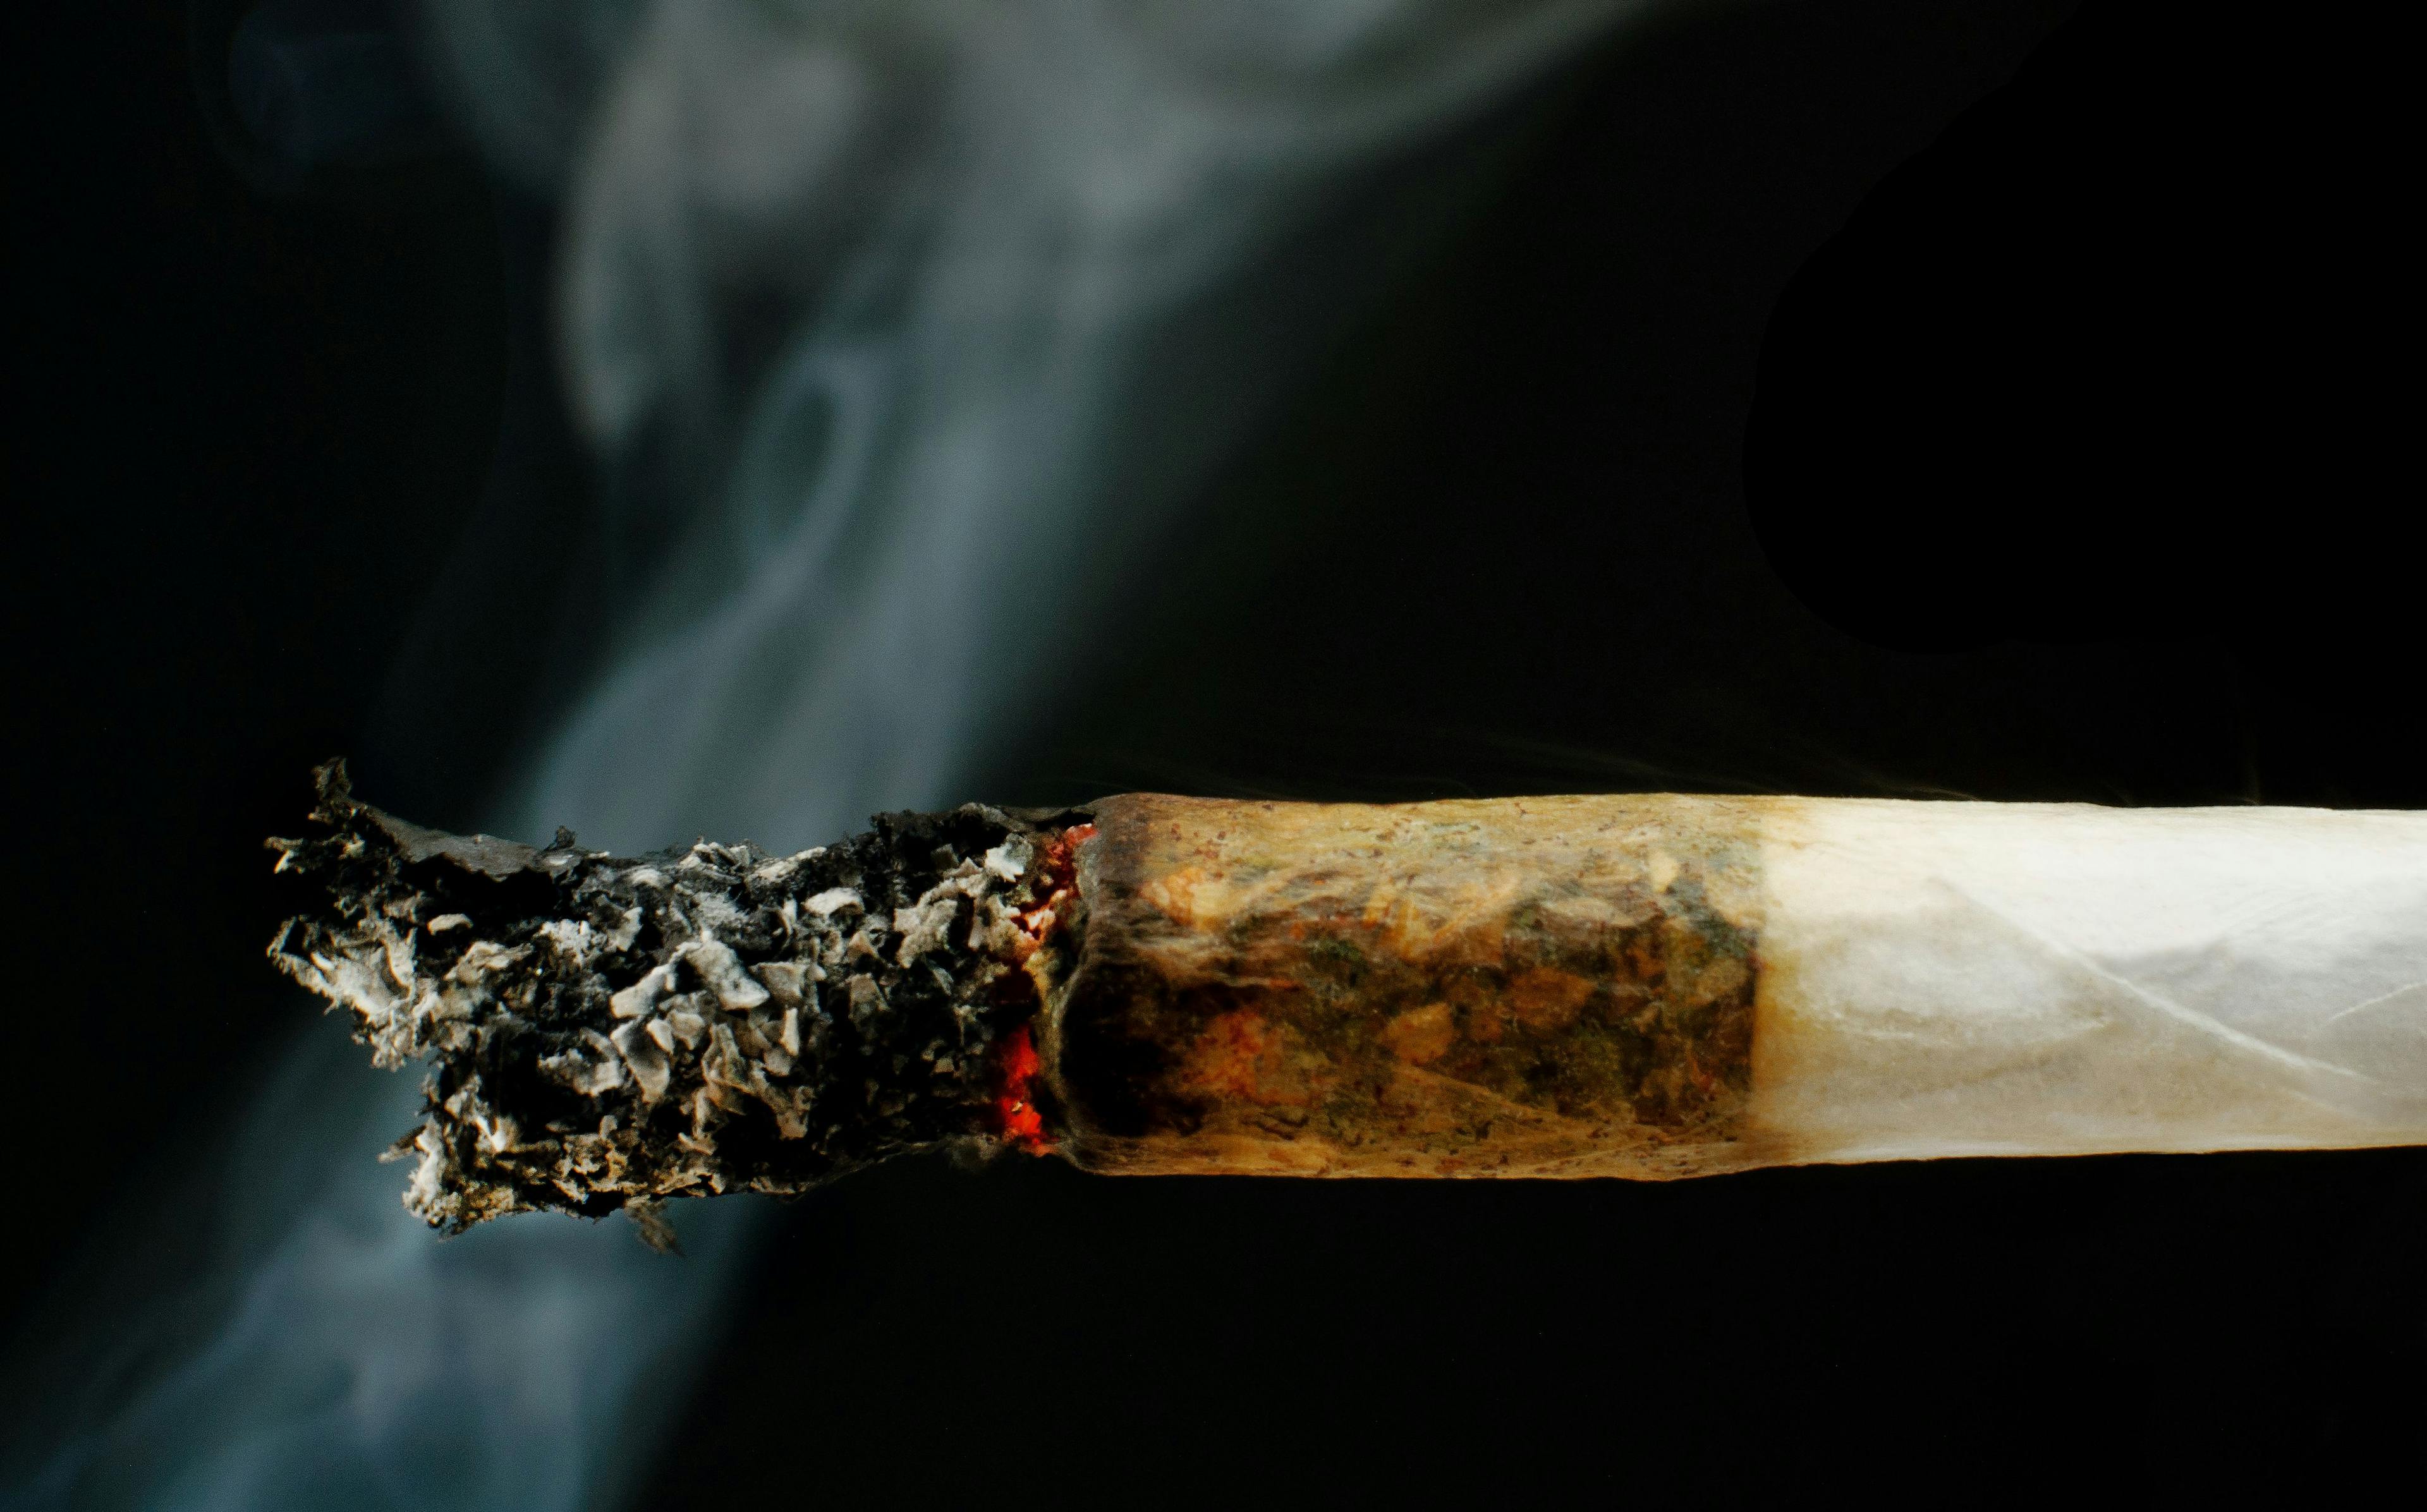 Marijuana Users’ Risk of Deadly Complication Doubles After Rare Type of Bleeding Stroke